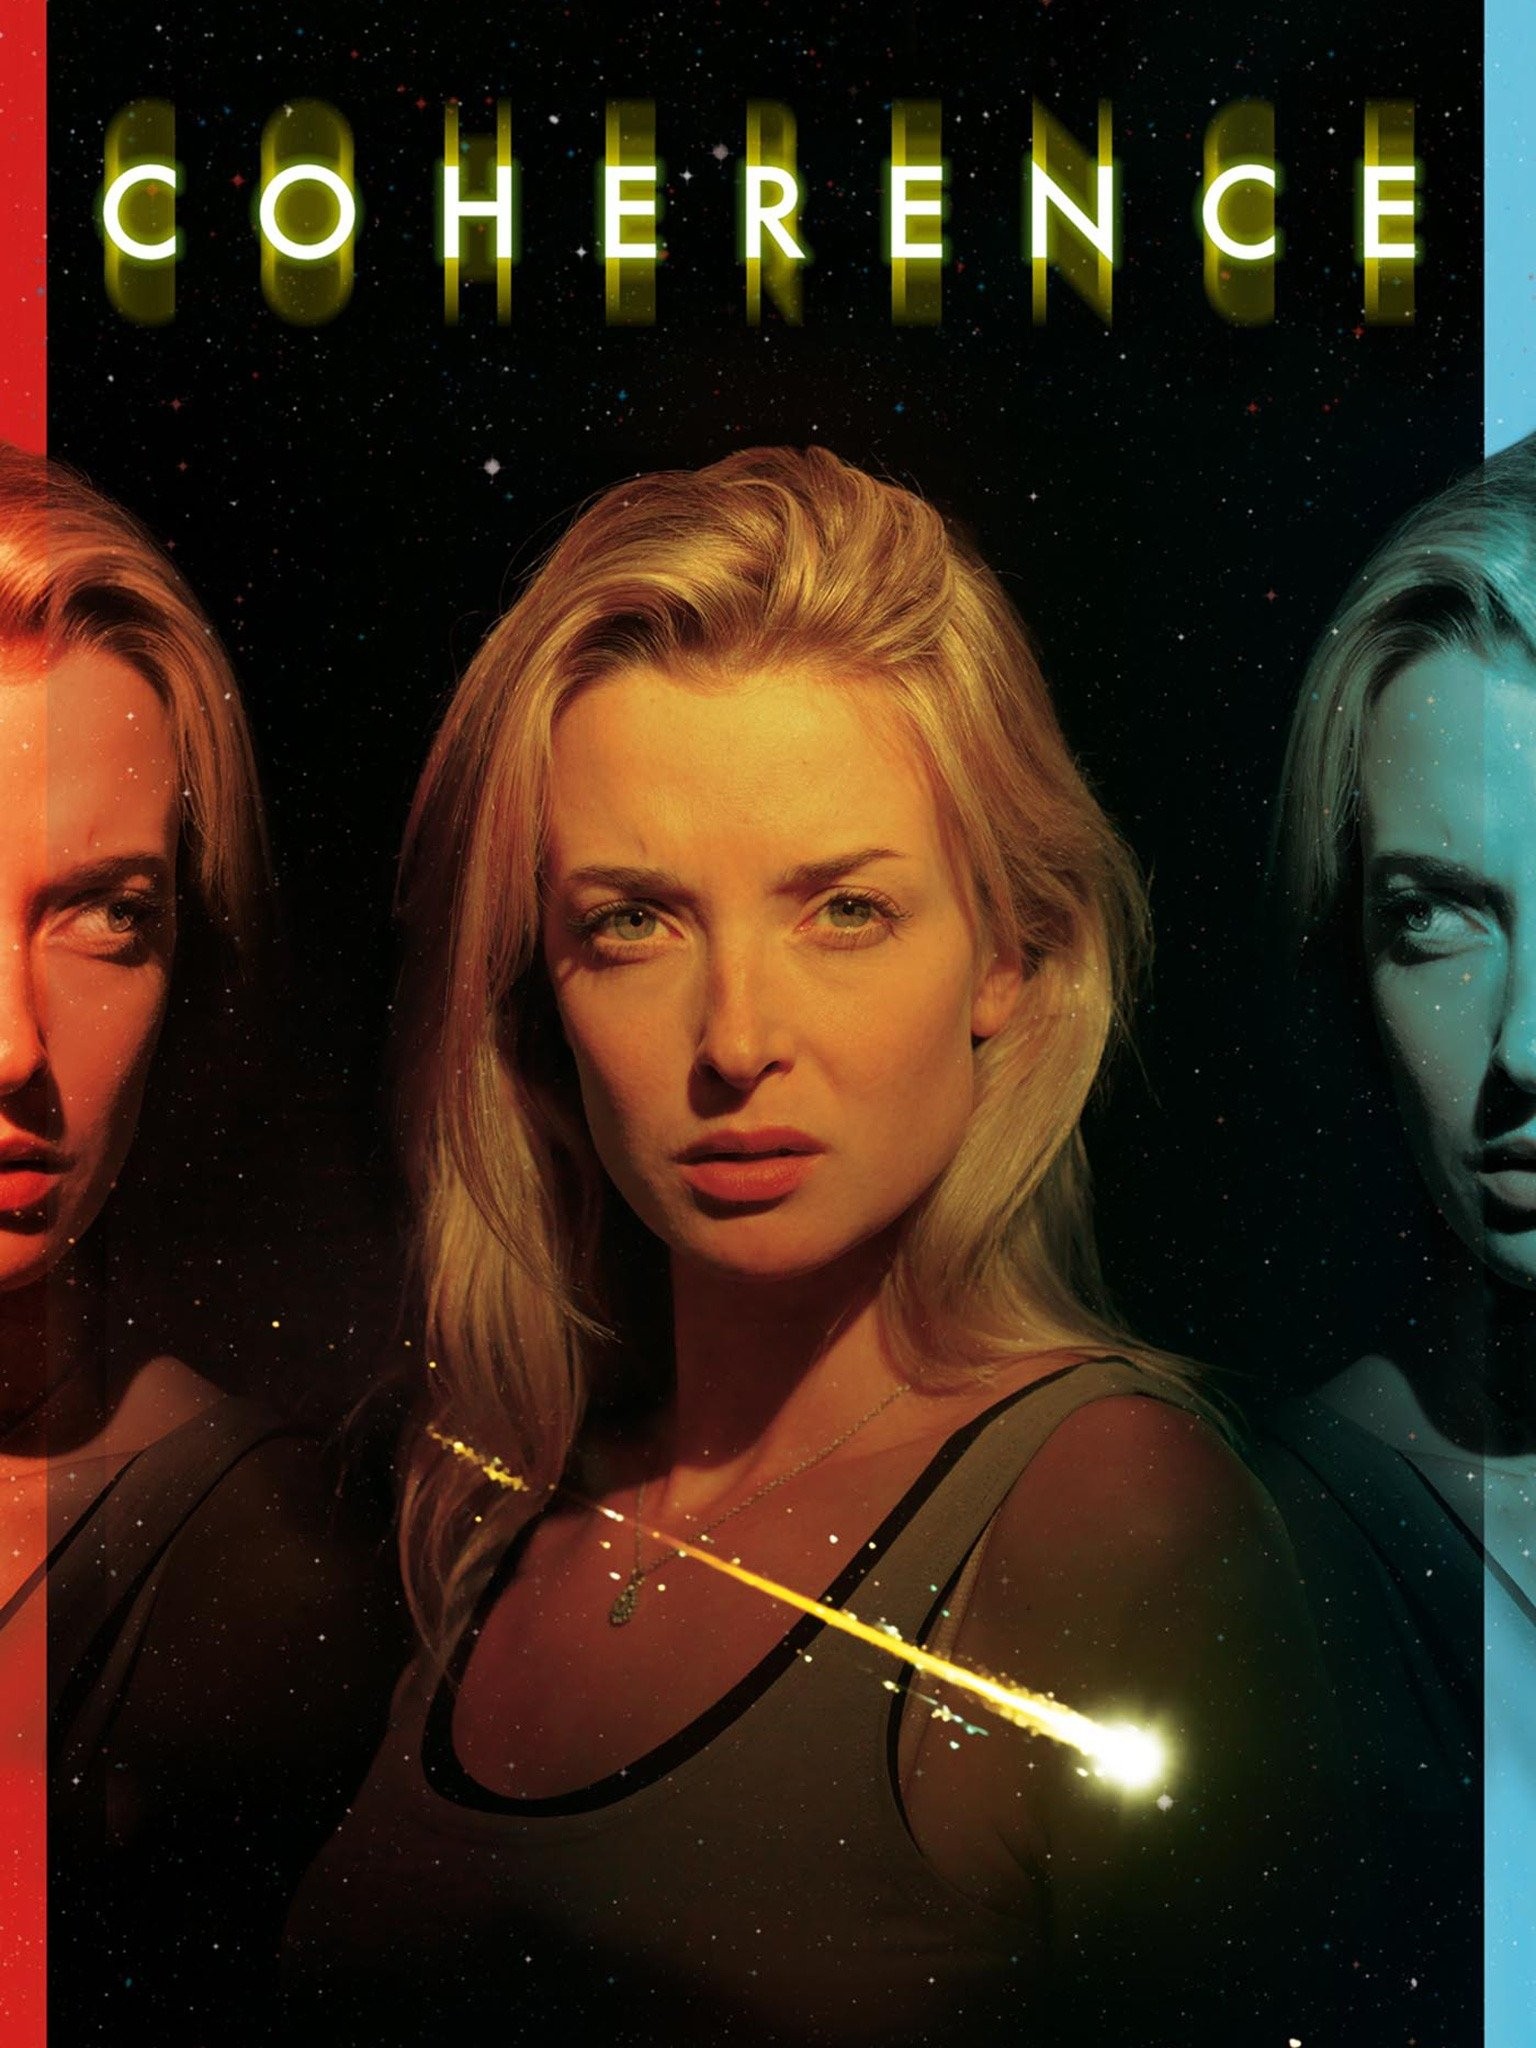 coherence